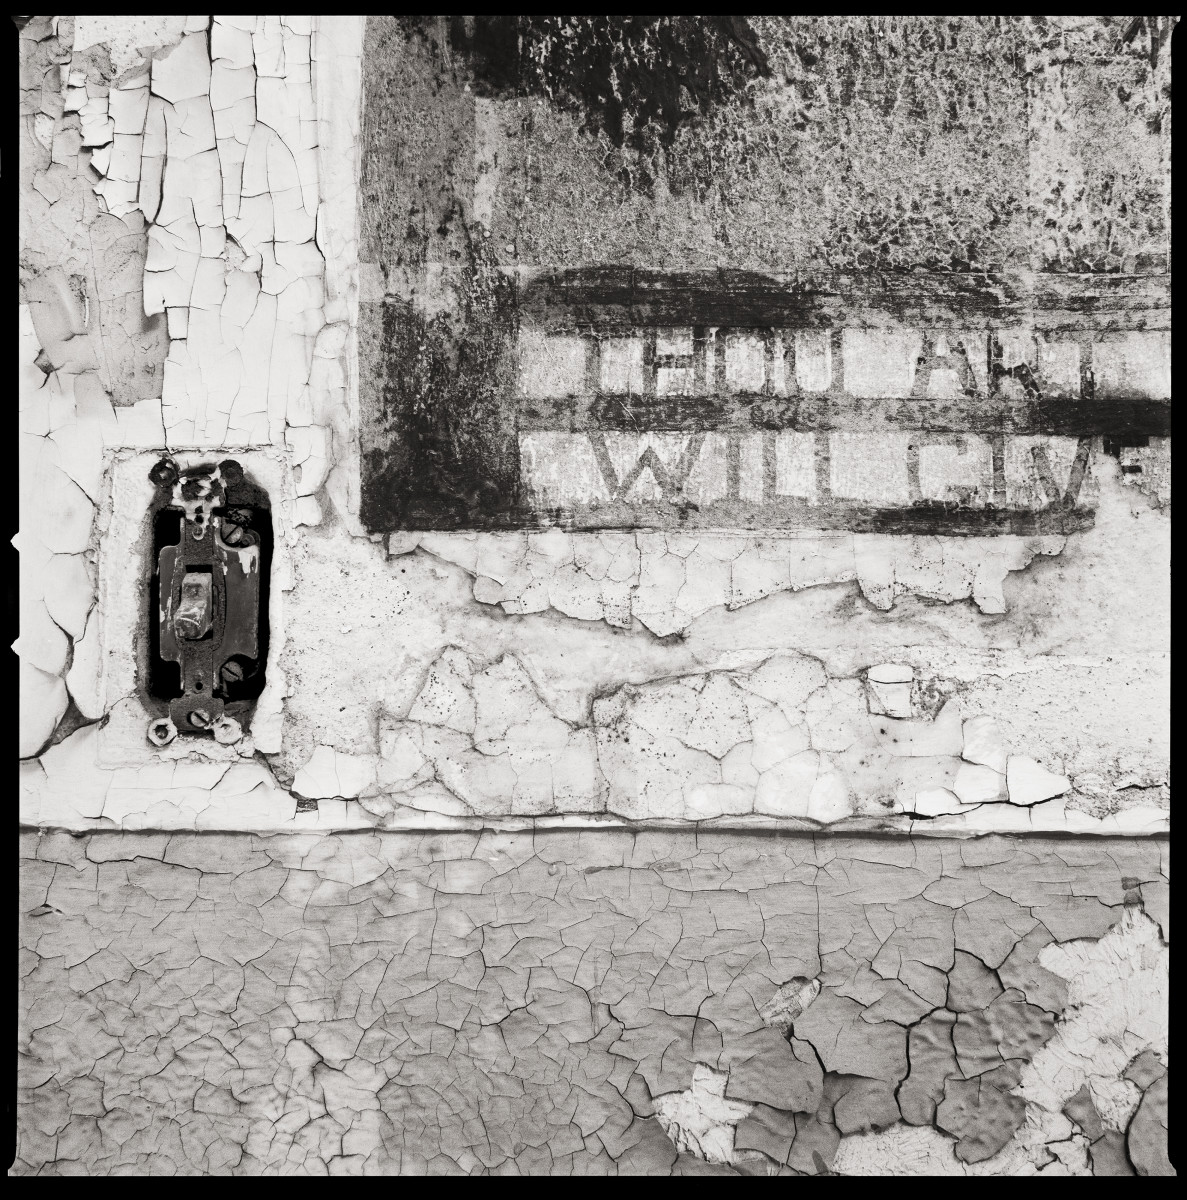 Thou Art…, Will Give… by Eric T. Kunsman  Image: ID: A black and white image shows a close up of a wall. There is a light switch in the left side of the wall and on the right it reads "Thou Art" "Will Give".  The wall itself has cracked paint and plaster.